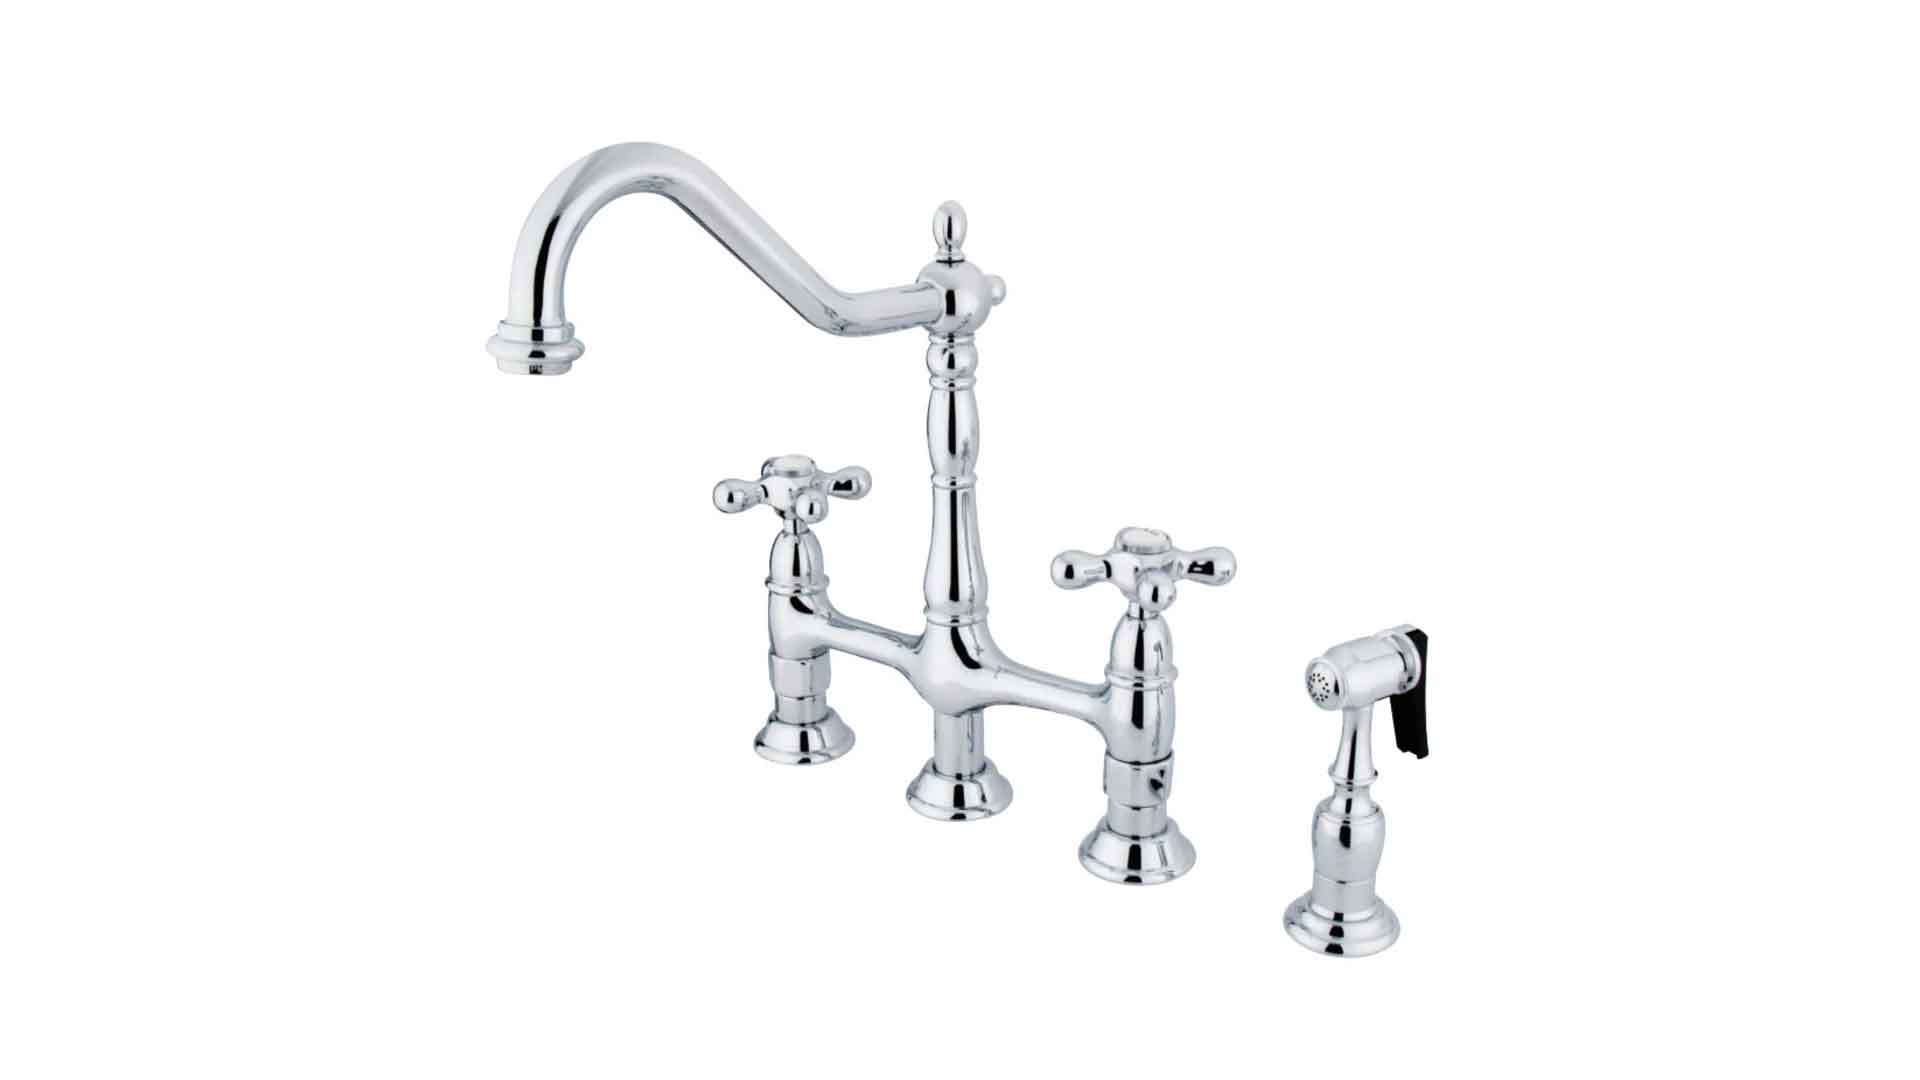 kingston Two Handle Faucets